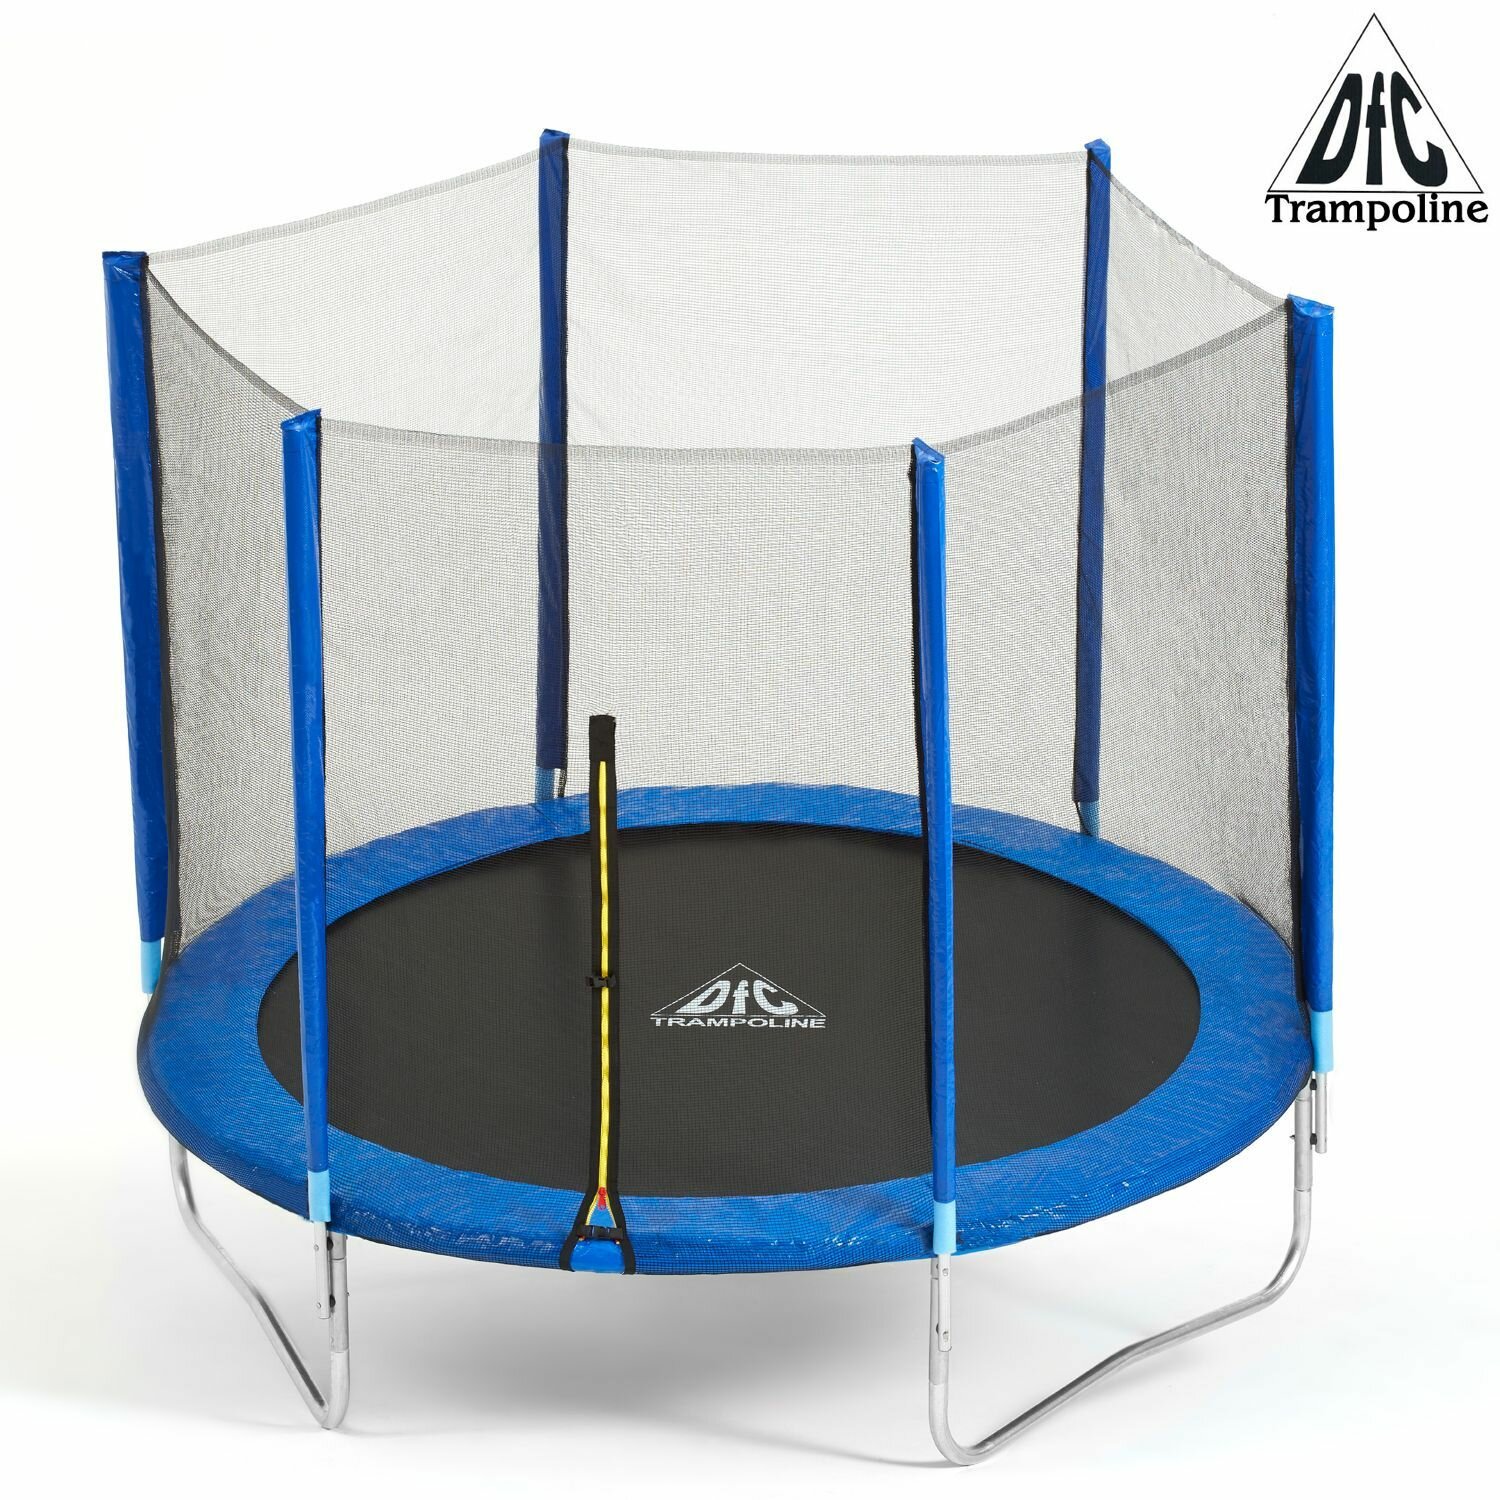  DFC Trampoline Fitness 5ft .,  (152)